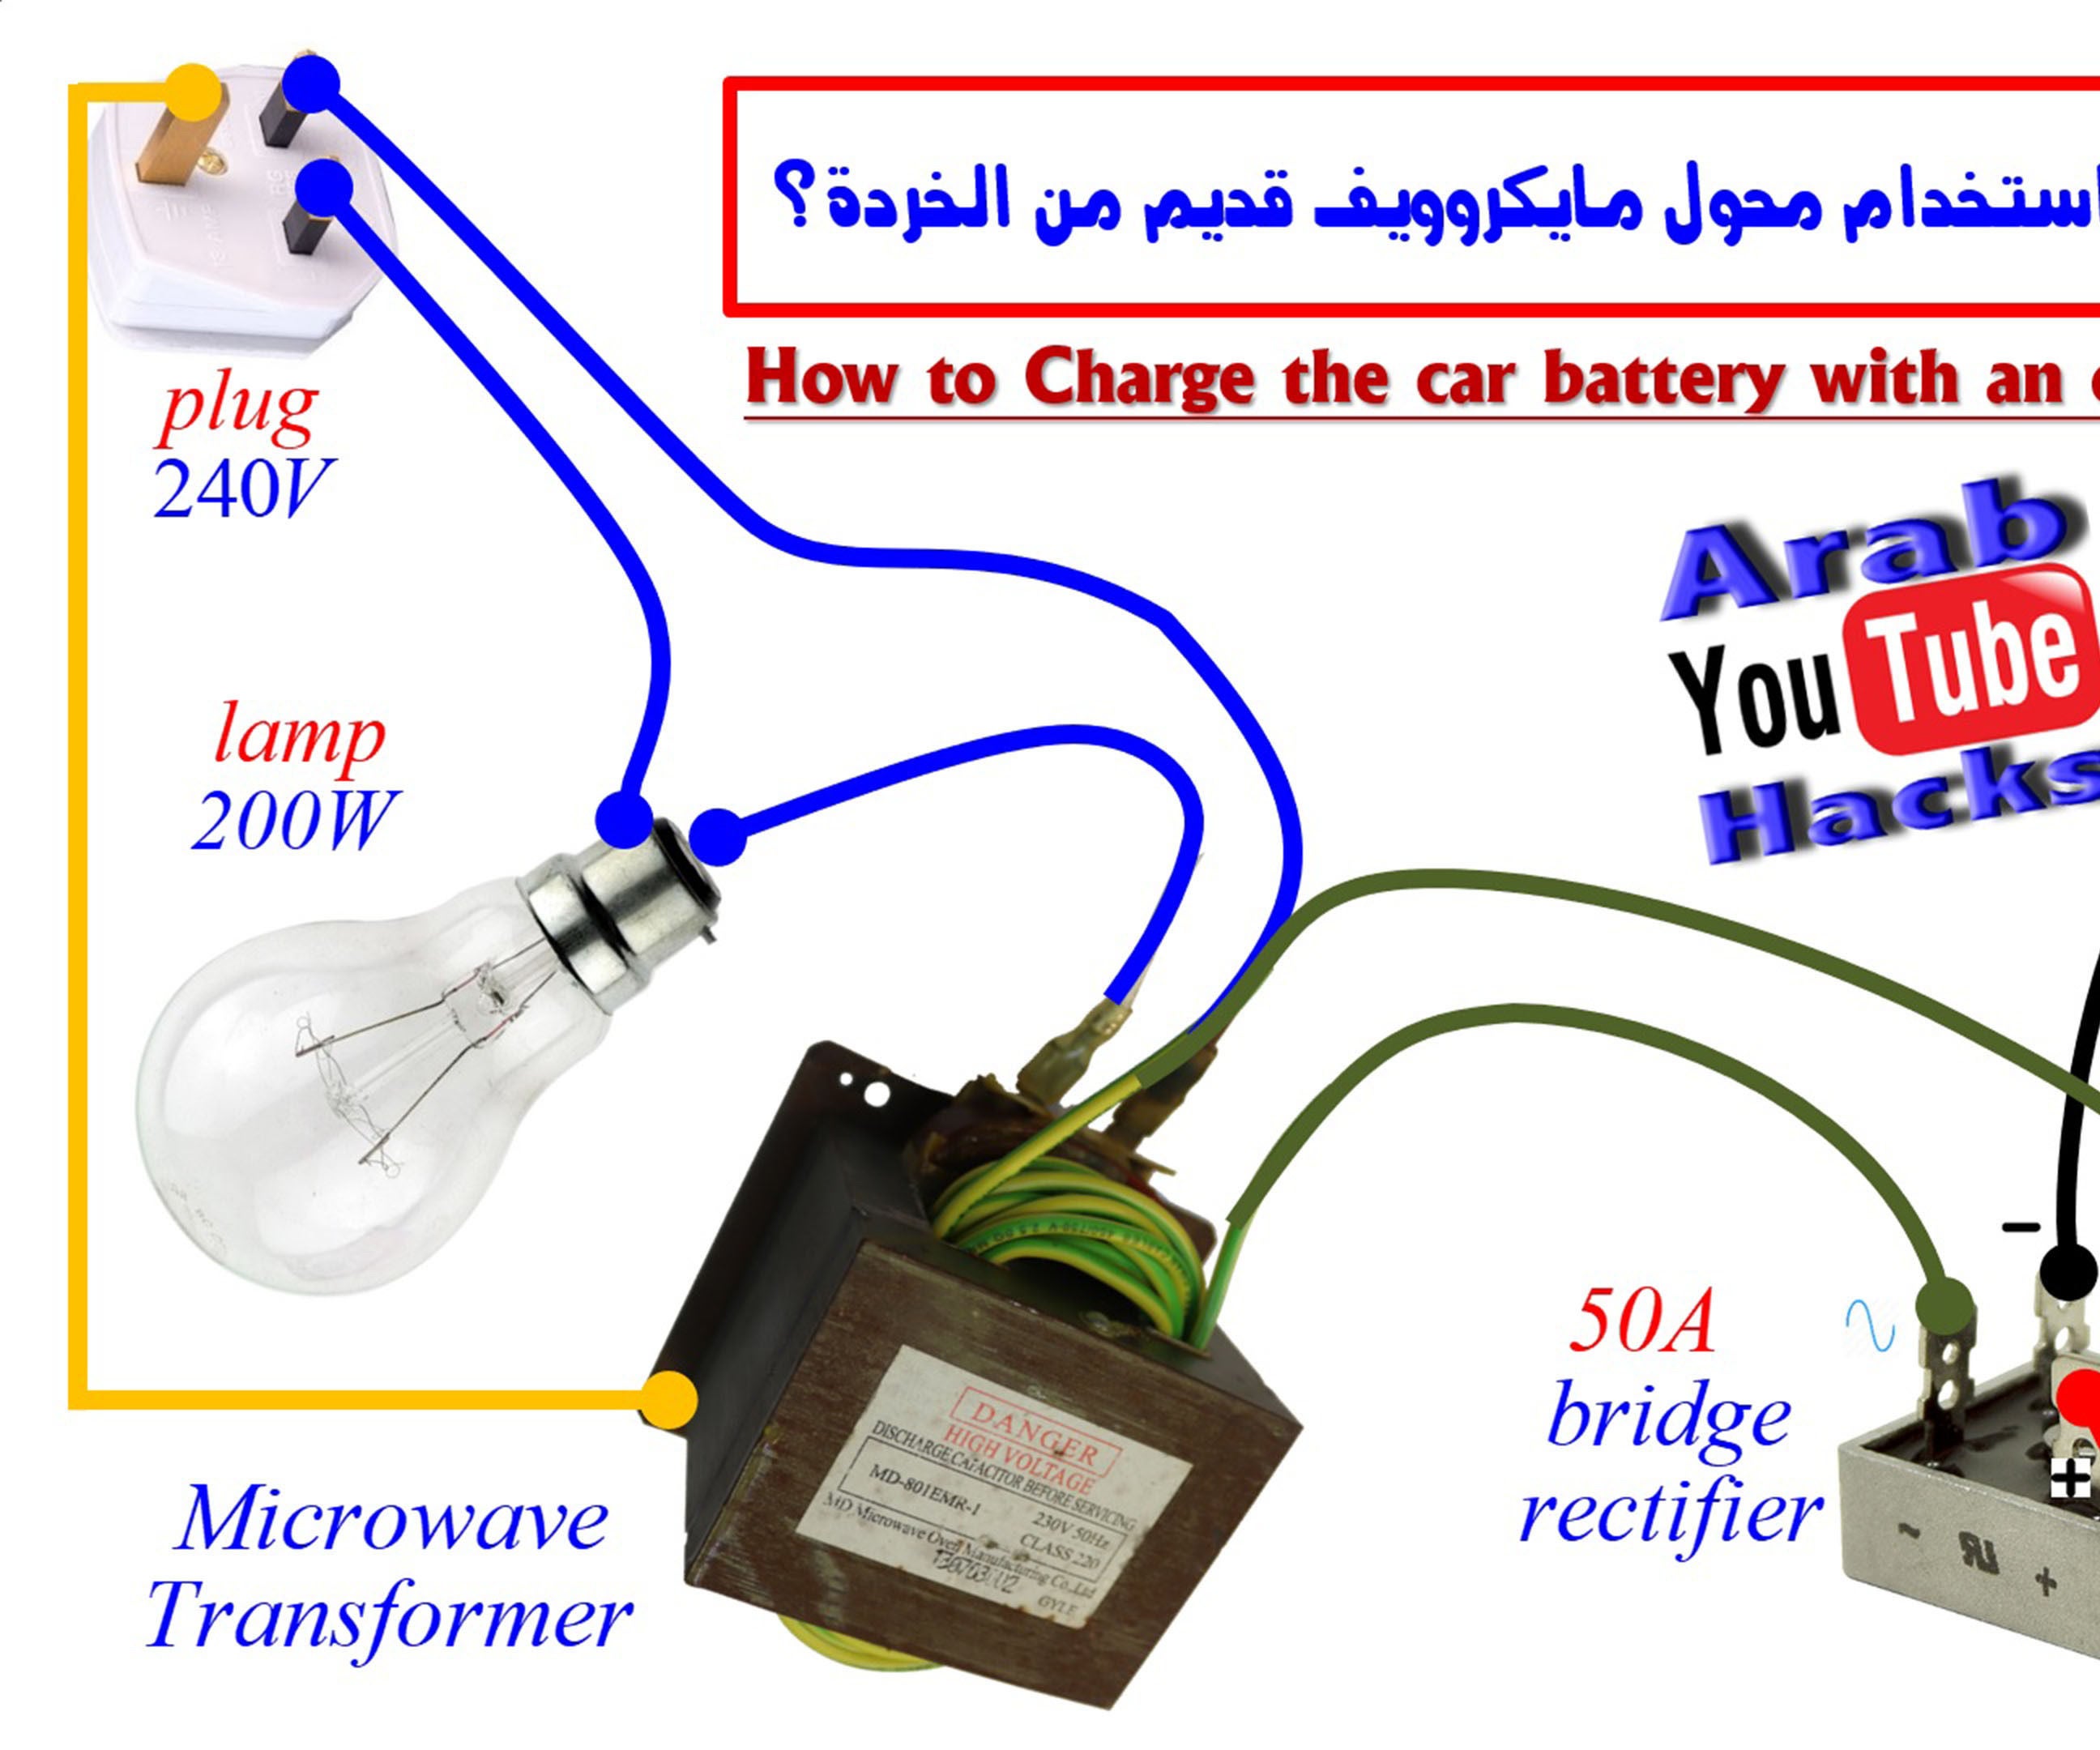 Microwave Transformer As Battery Charger